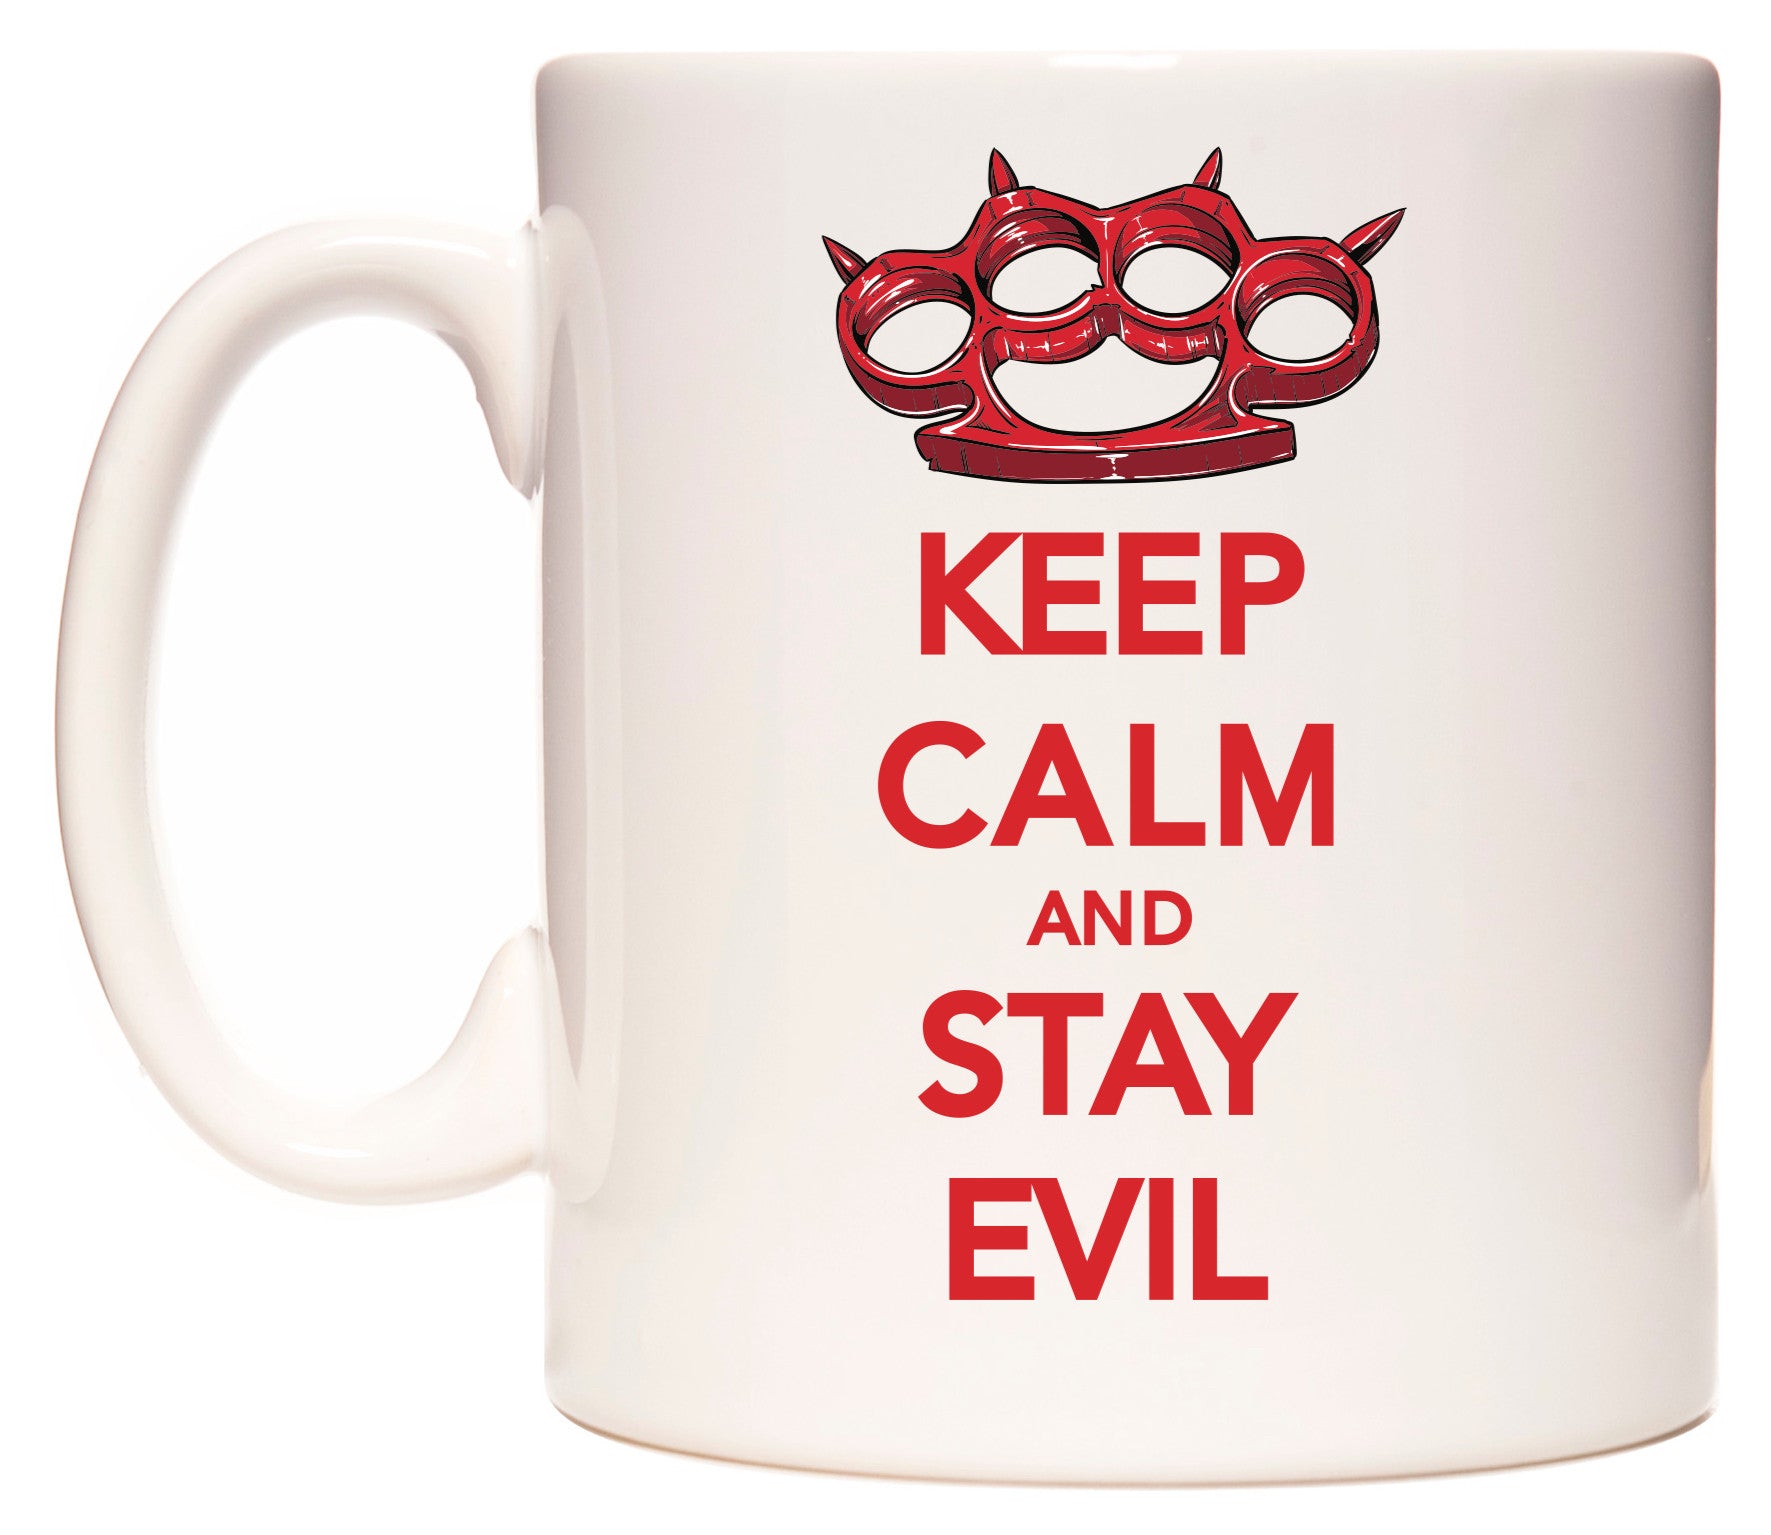 This mug features KEEP CALM AND STAY EVIL